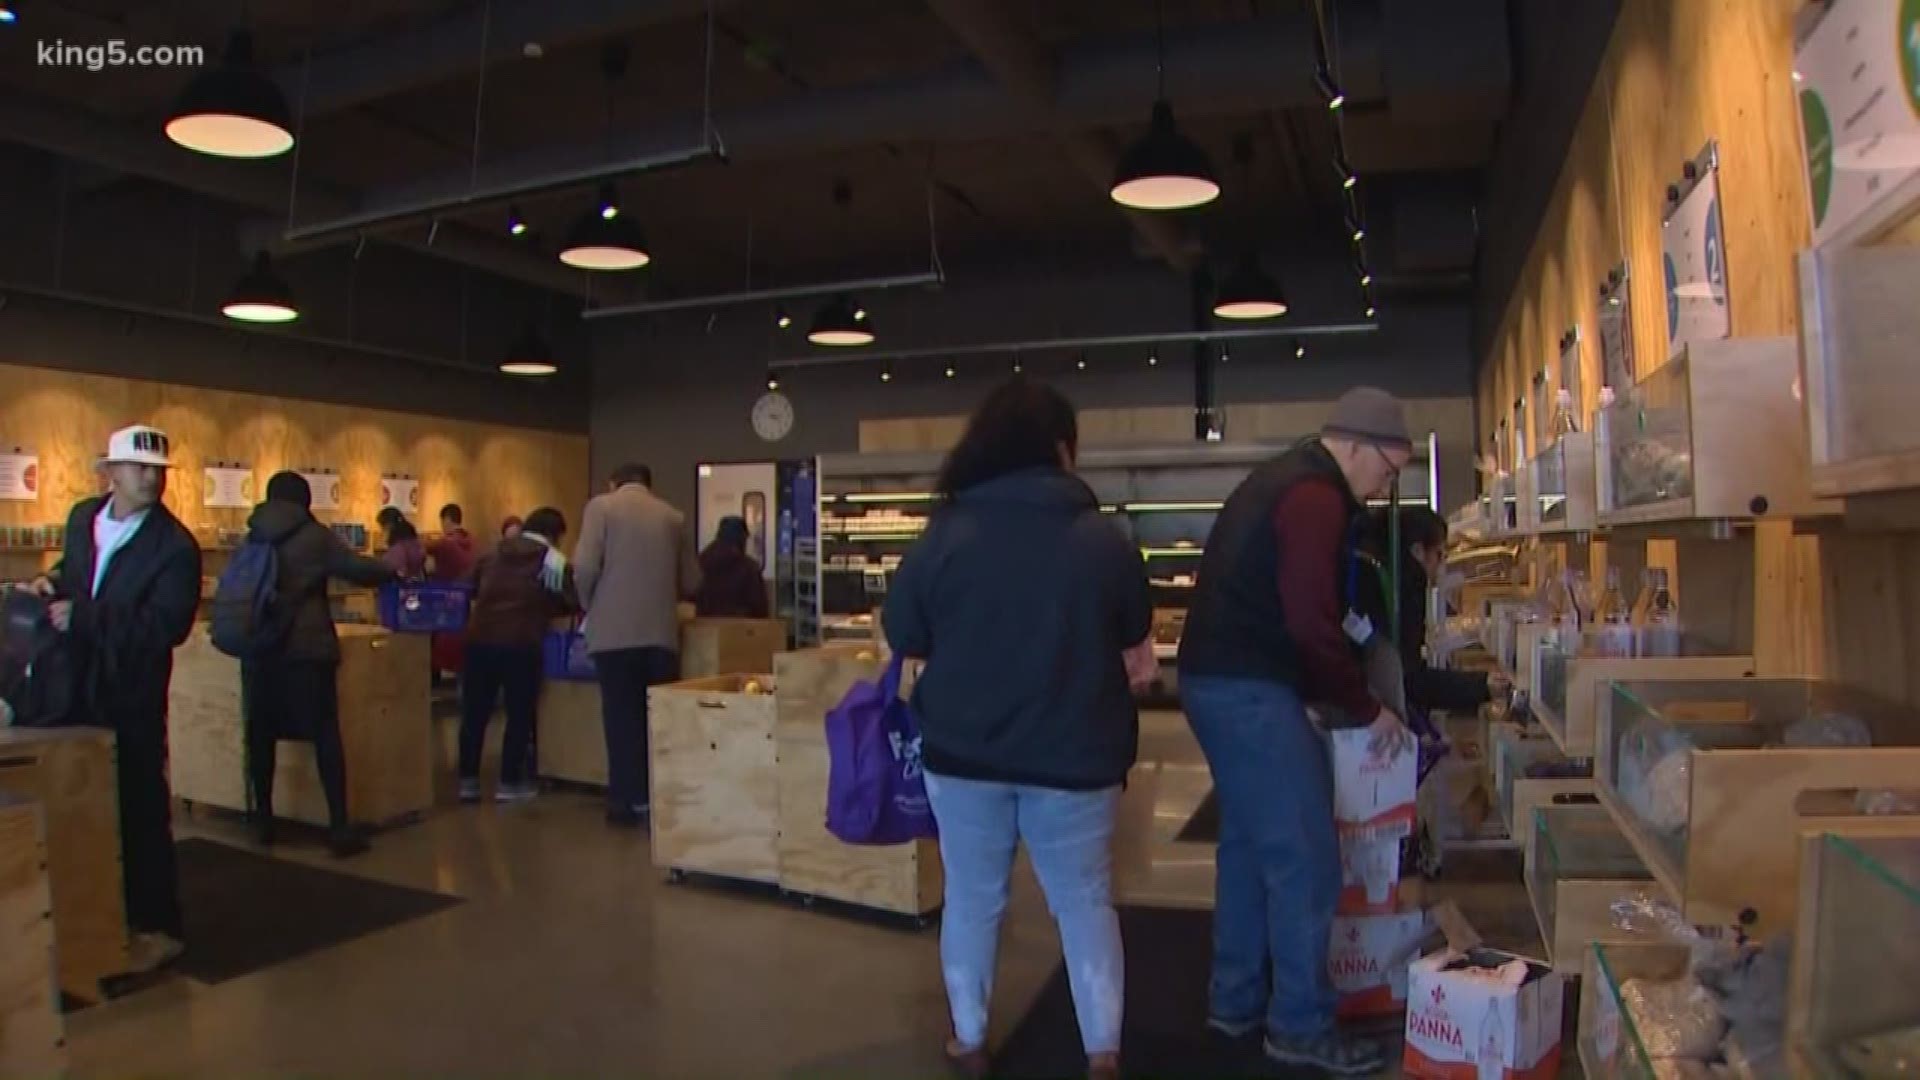 Northwest Harvest's SODO Community Market is maintaining its usual food supply, but hope people donate items such as hand sanitizer to help families in need